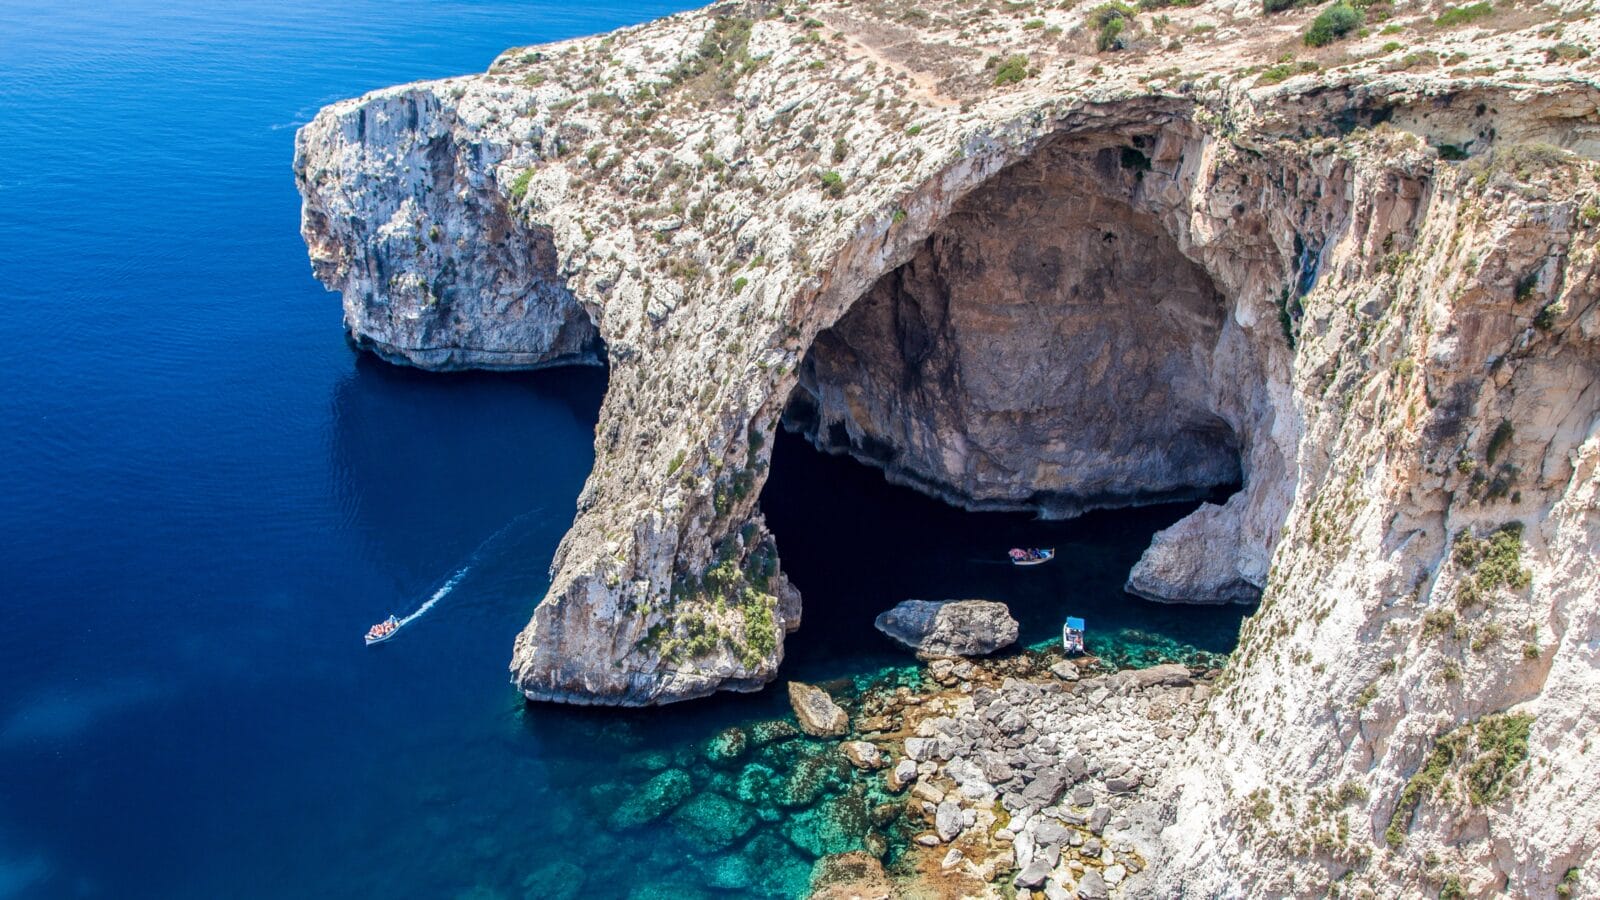 <p>The southern coast of Malta is home to a network of beautiful, dramatic caves cut into the cliffside by the surrounding sea over millions of years. As you approach the cave network by sea, you’ll be met by a giant 100-foot arch before witnessing stunning reflections of crystal clear water on the vaulted ceilings of the chambers.</p><p>The caves are famous for glowing in colors ranging from green to purple and orange, depending on their mineral composition.</p>